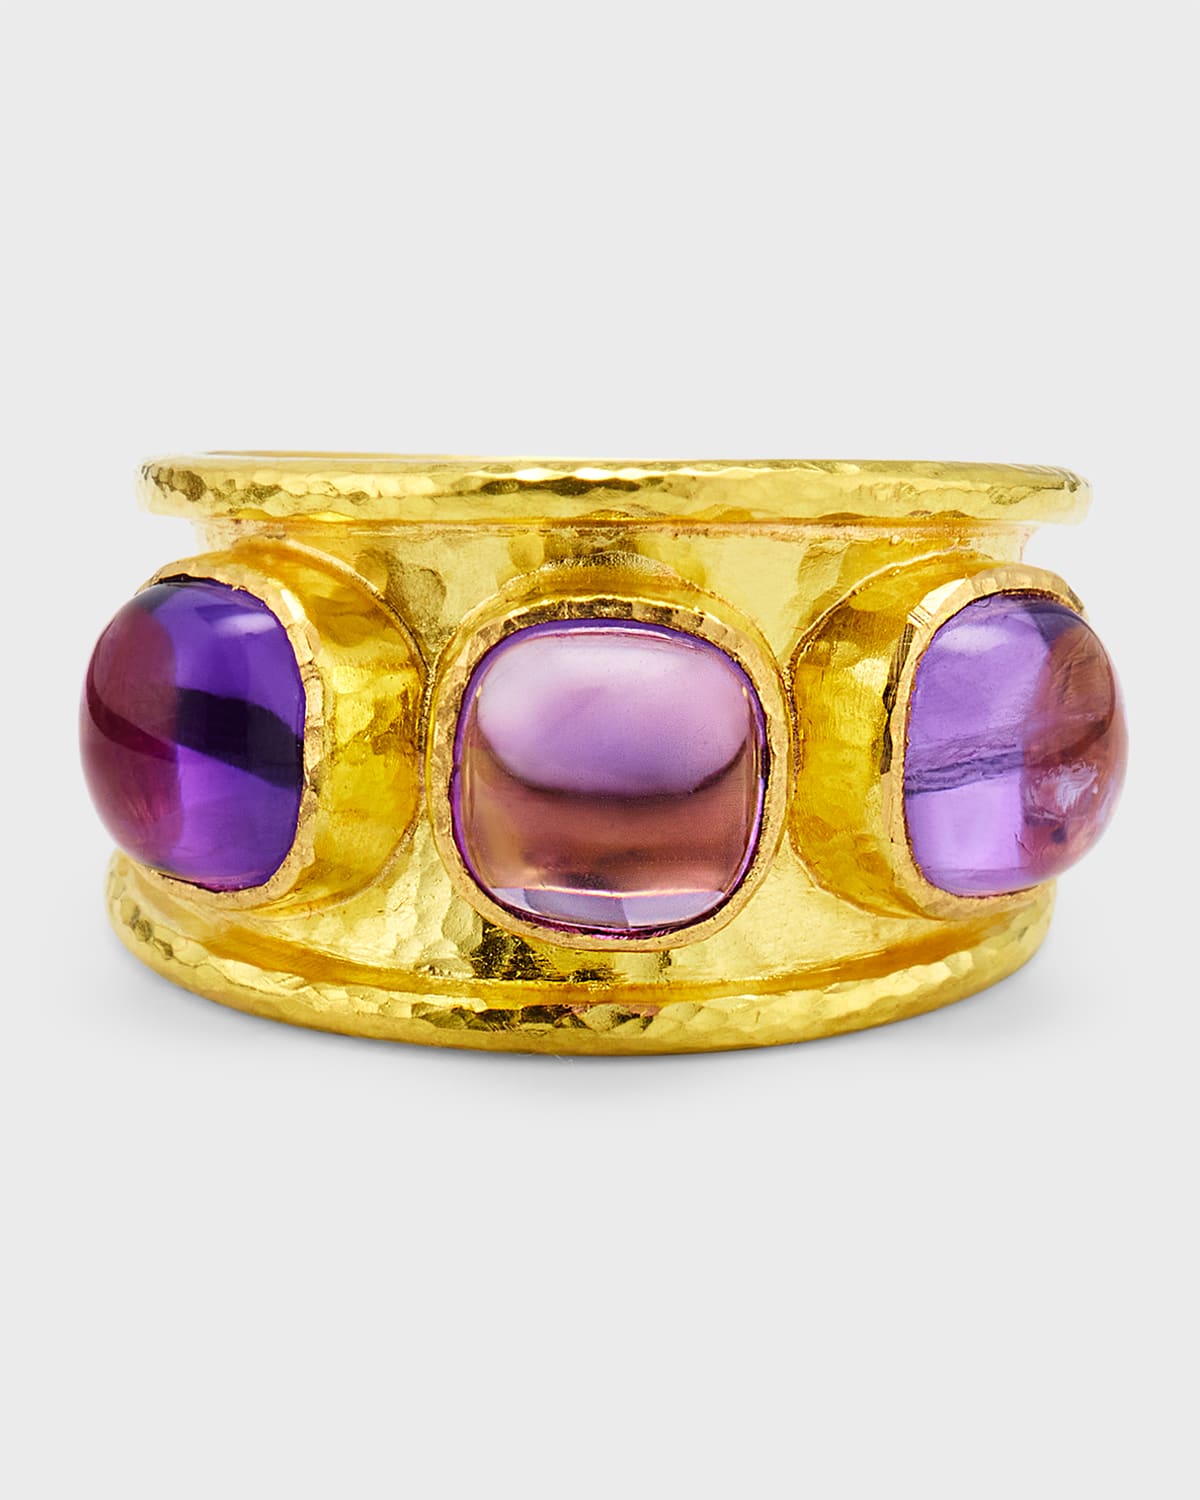 19K Amethyst Tapered Cigar Band Ring, Size 6.5